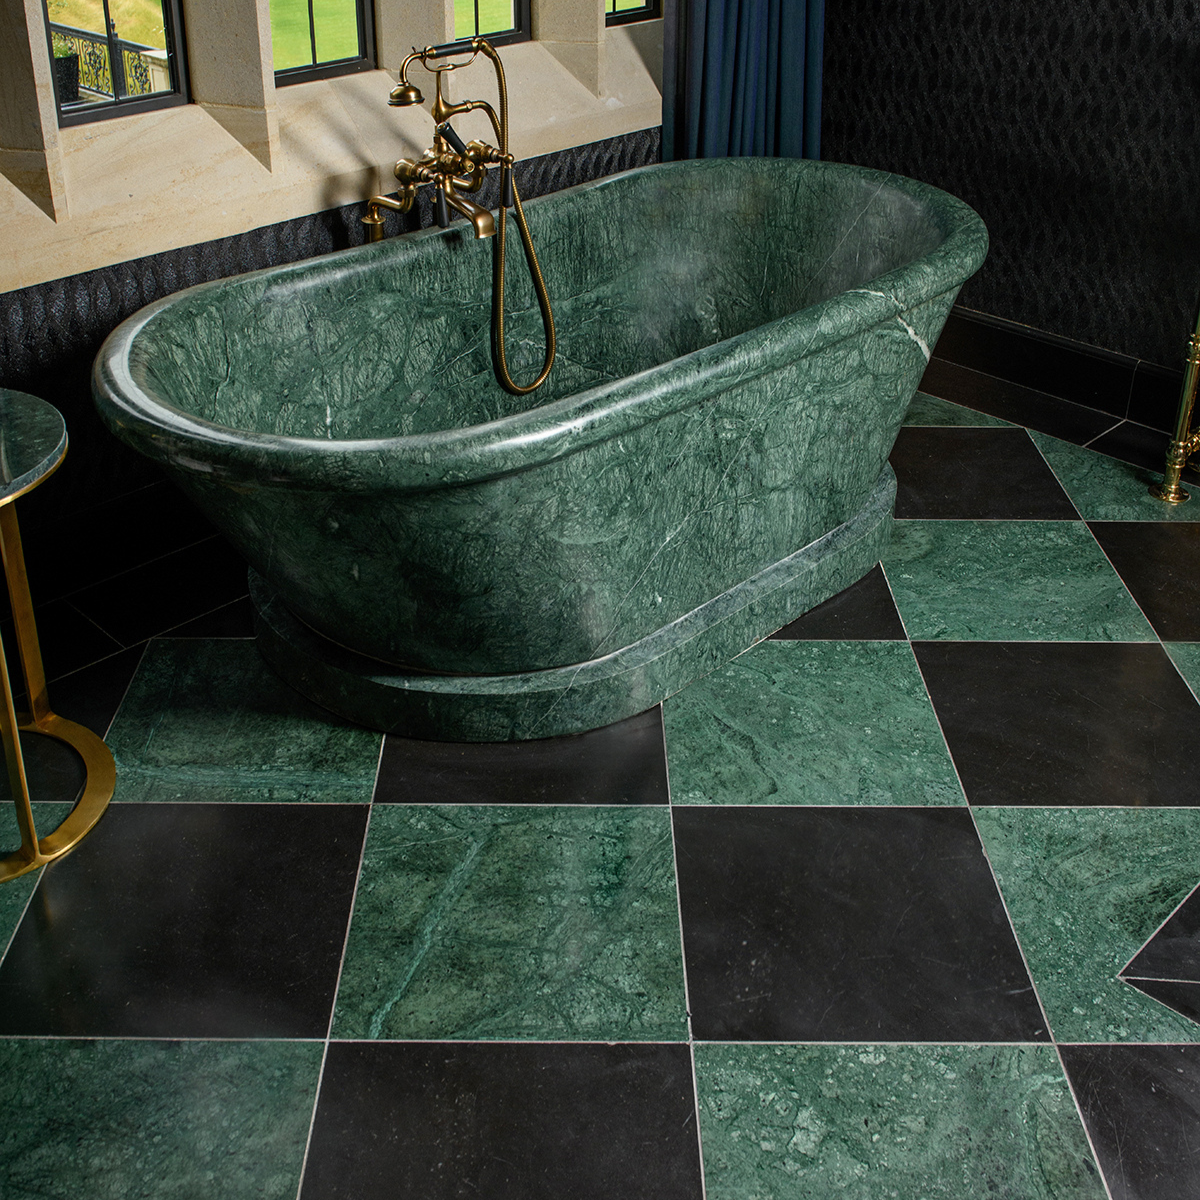 Neo Jacobean project - marble bath and flooring from Lapicida